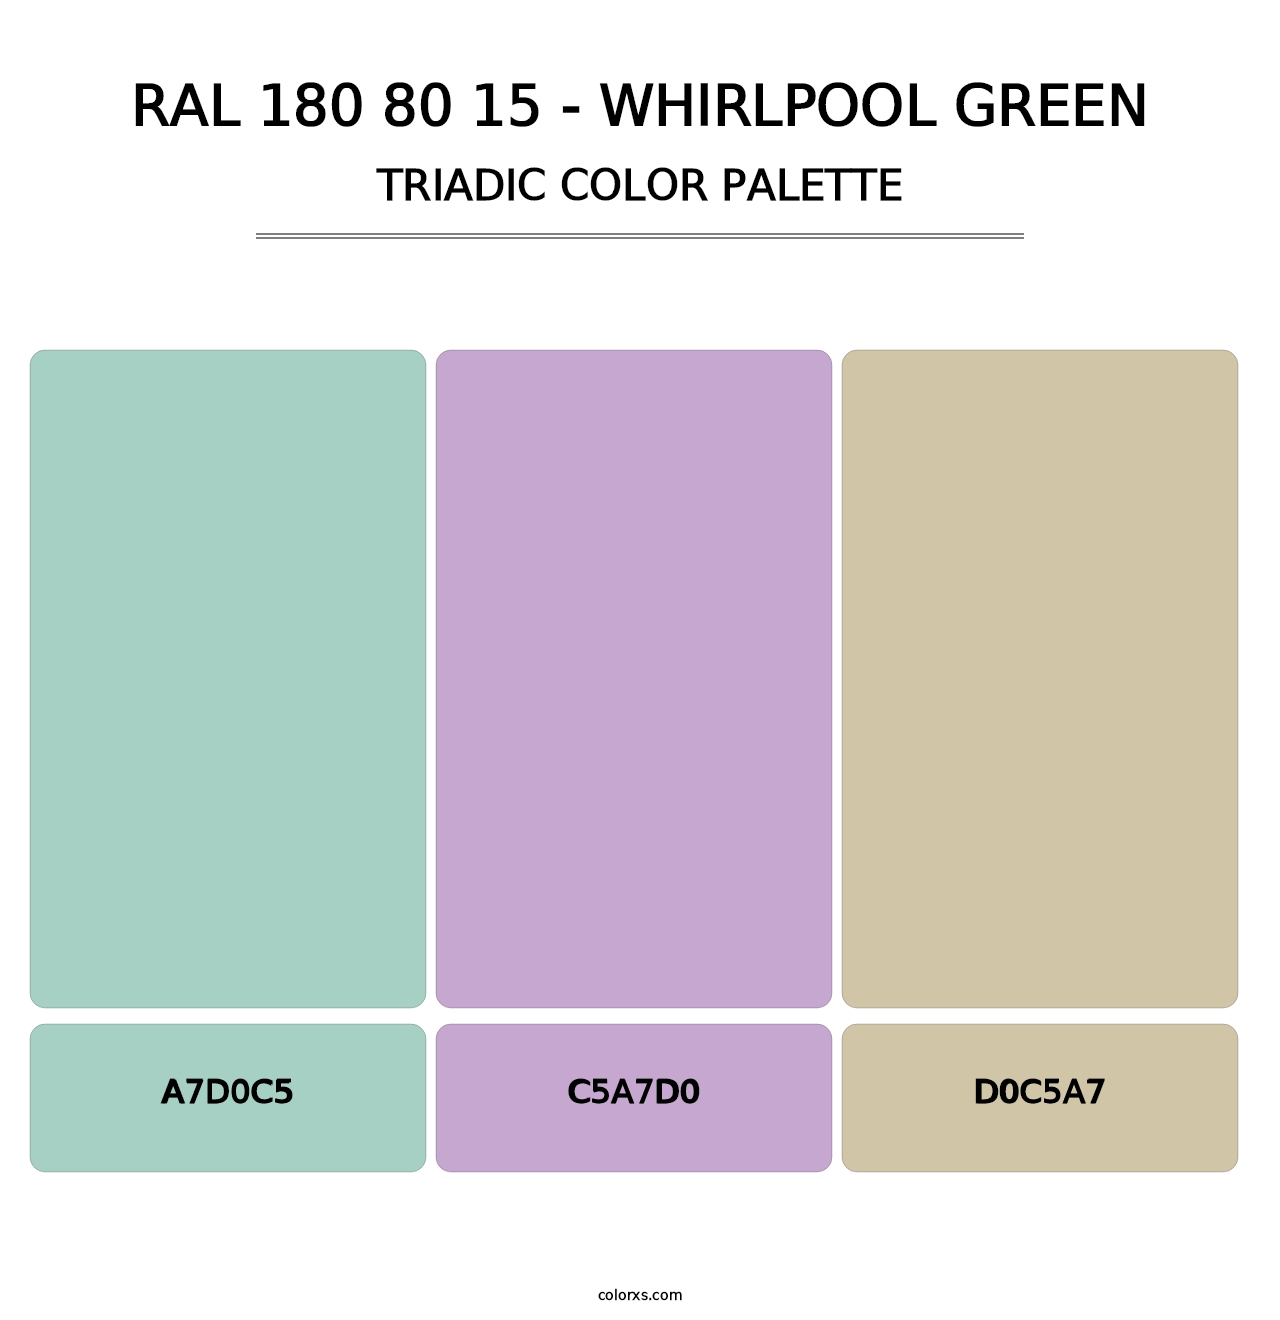 RAL 180 80 15 - Whirlpool Green - Triadic Color Palette